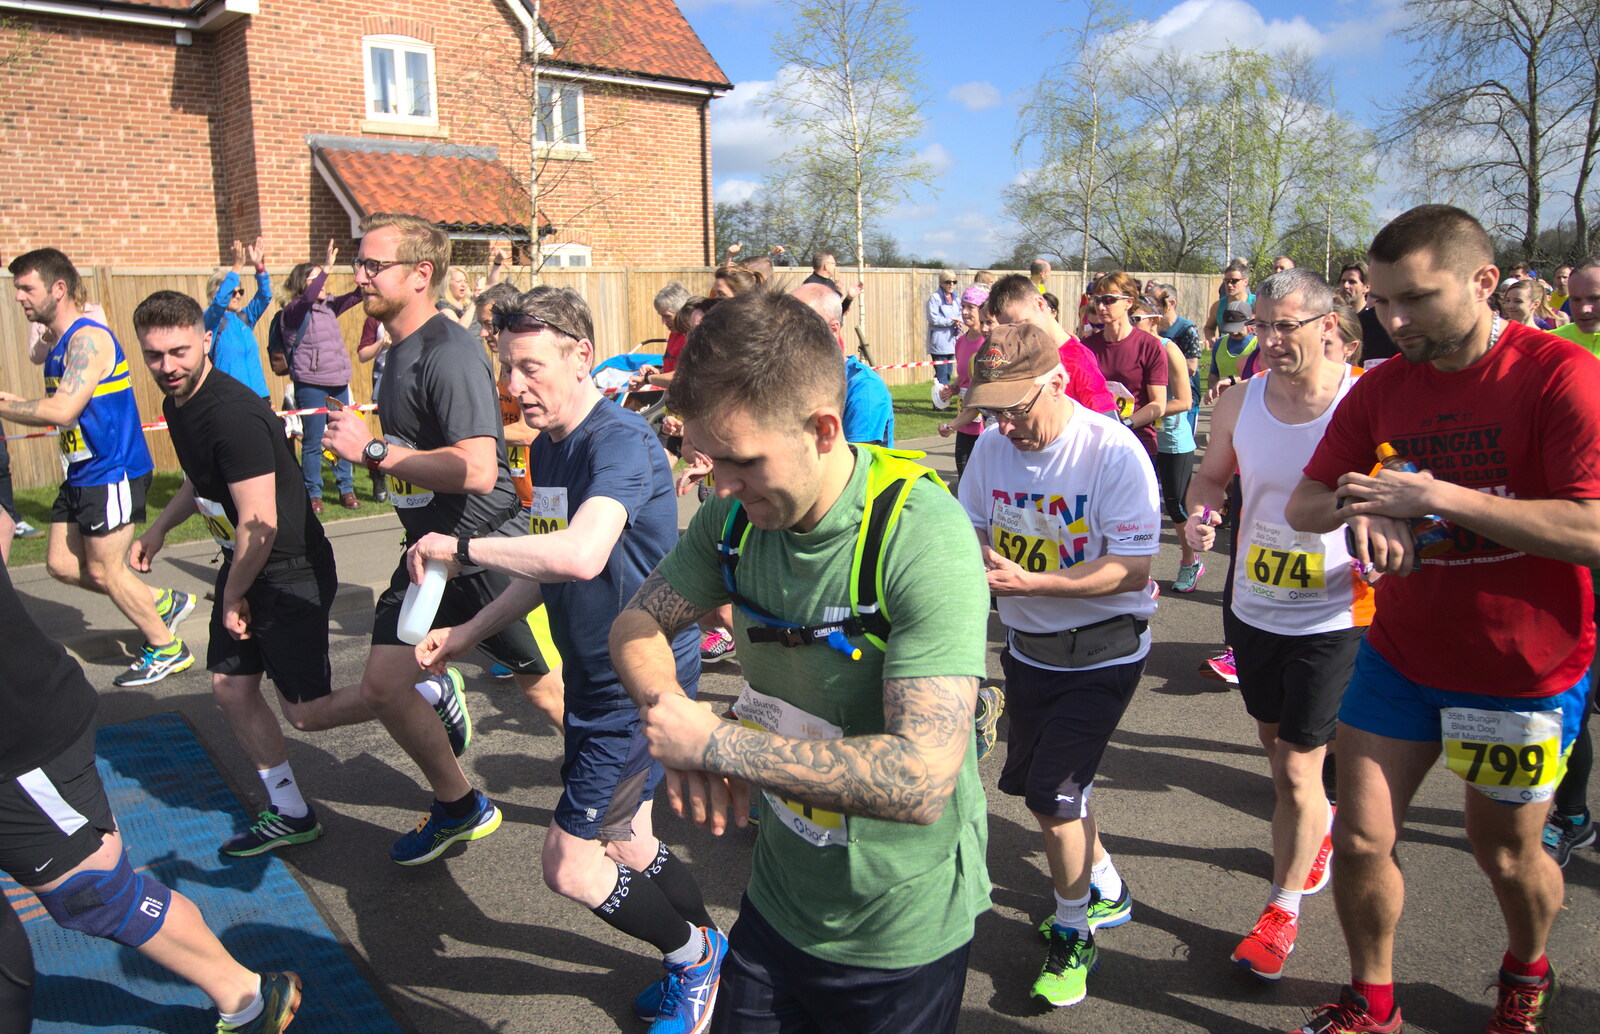 Watches are synchronised from The Black Dog Festival of Running, Bungay, Suffolk - 2nd April 2017